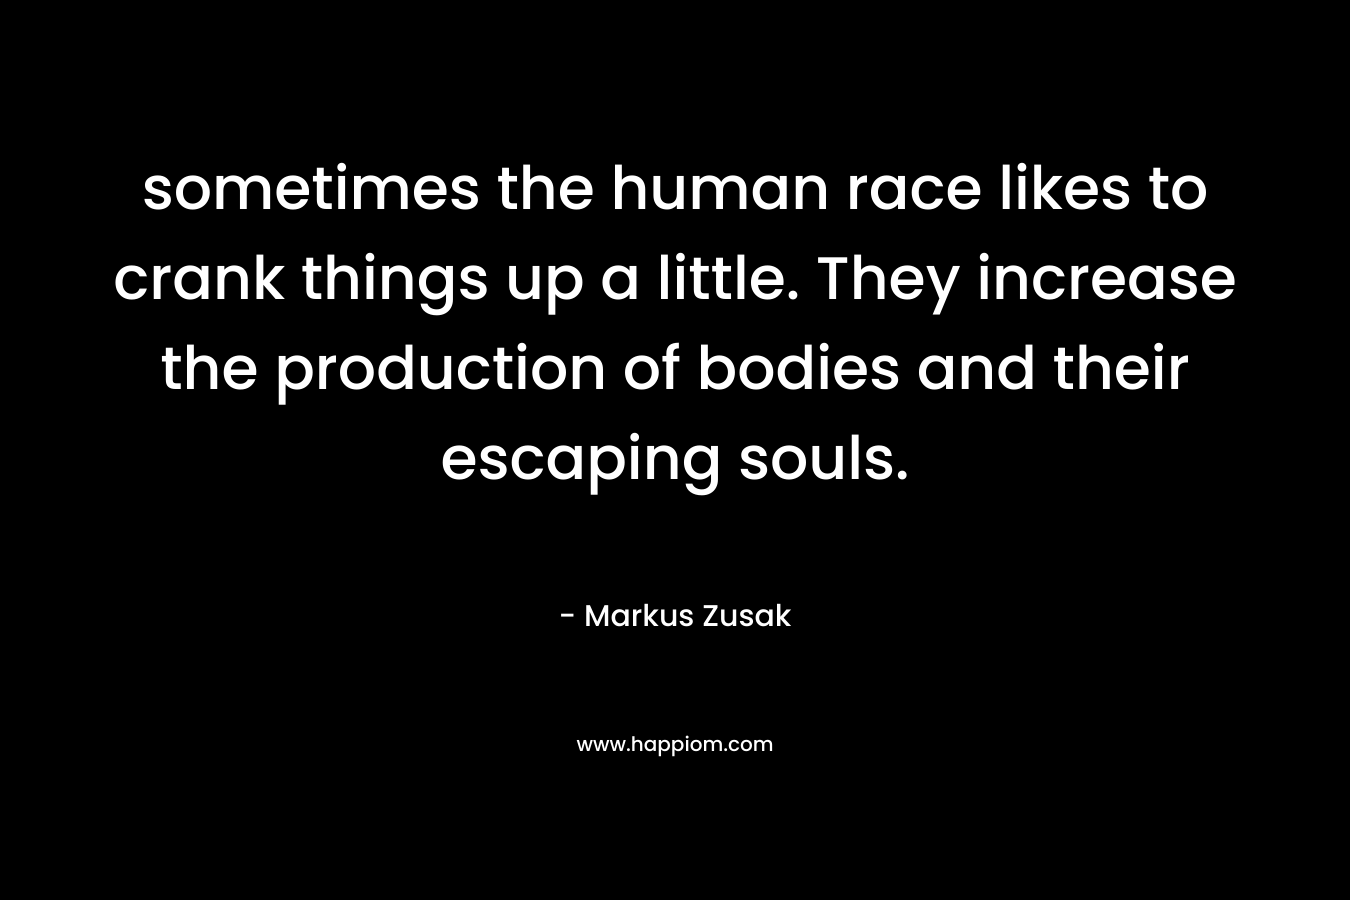 sometimes the human race likes to crank things up a little. They increase the production of bodies and their escaping souls. – Markus Zusak